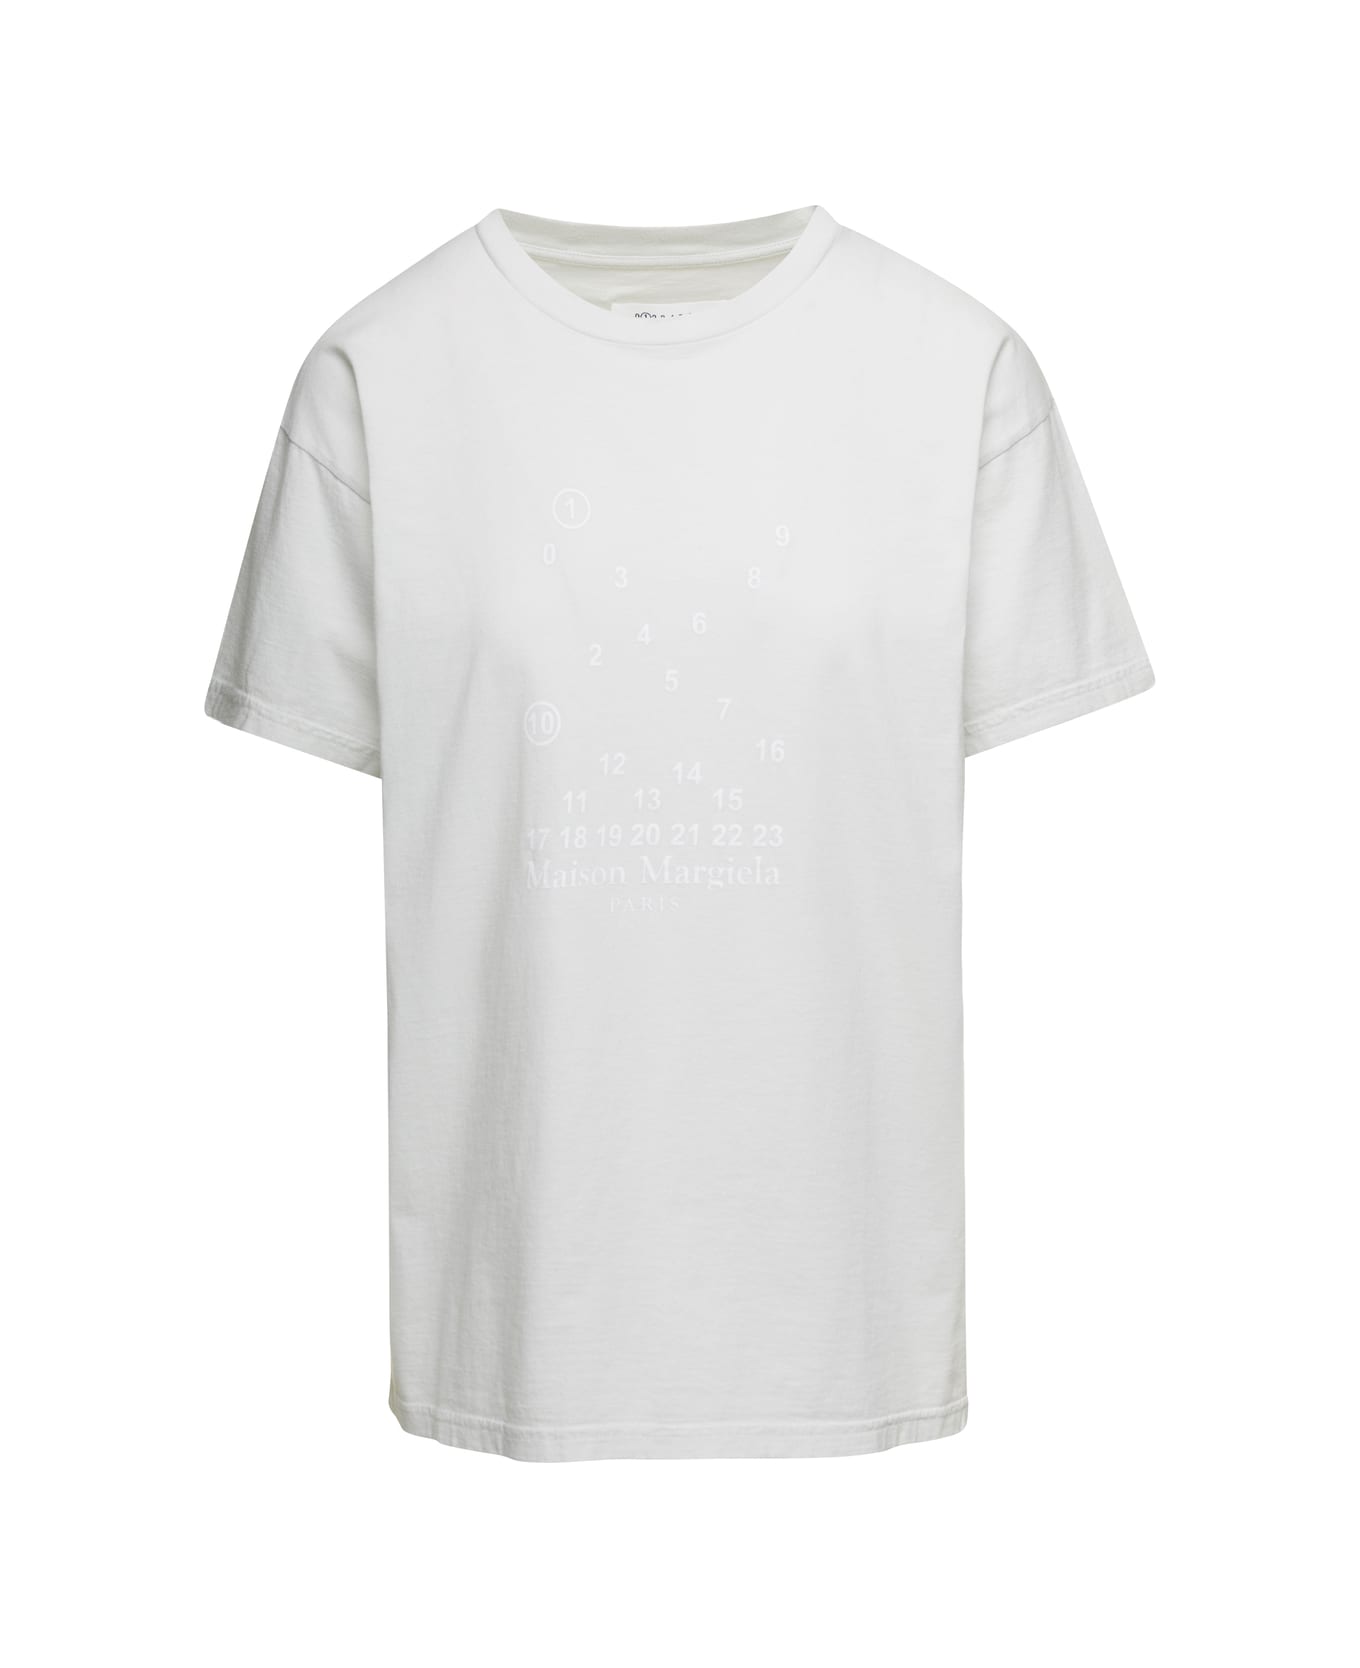 Maison Margiela White T-shirt With Printed Logo On The Front In Cotton Woman - White